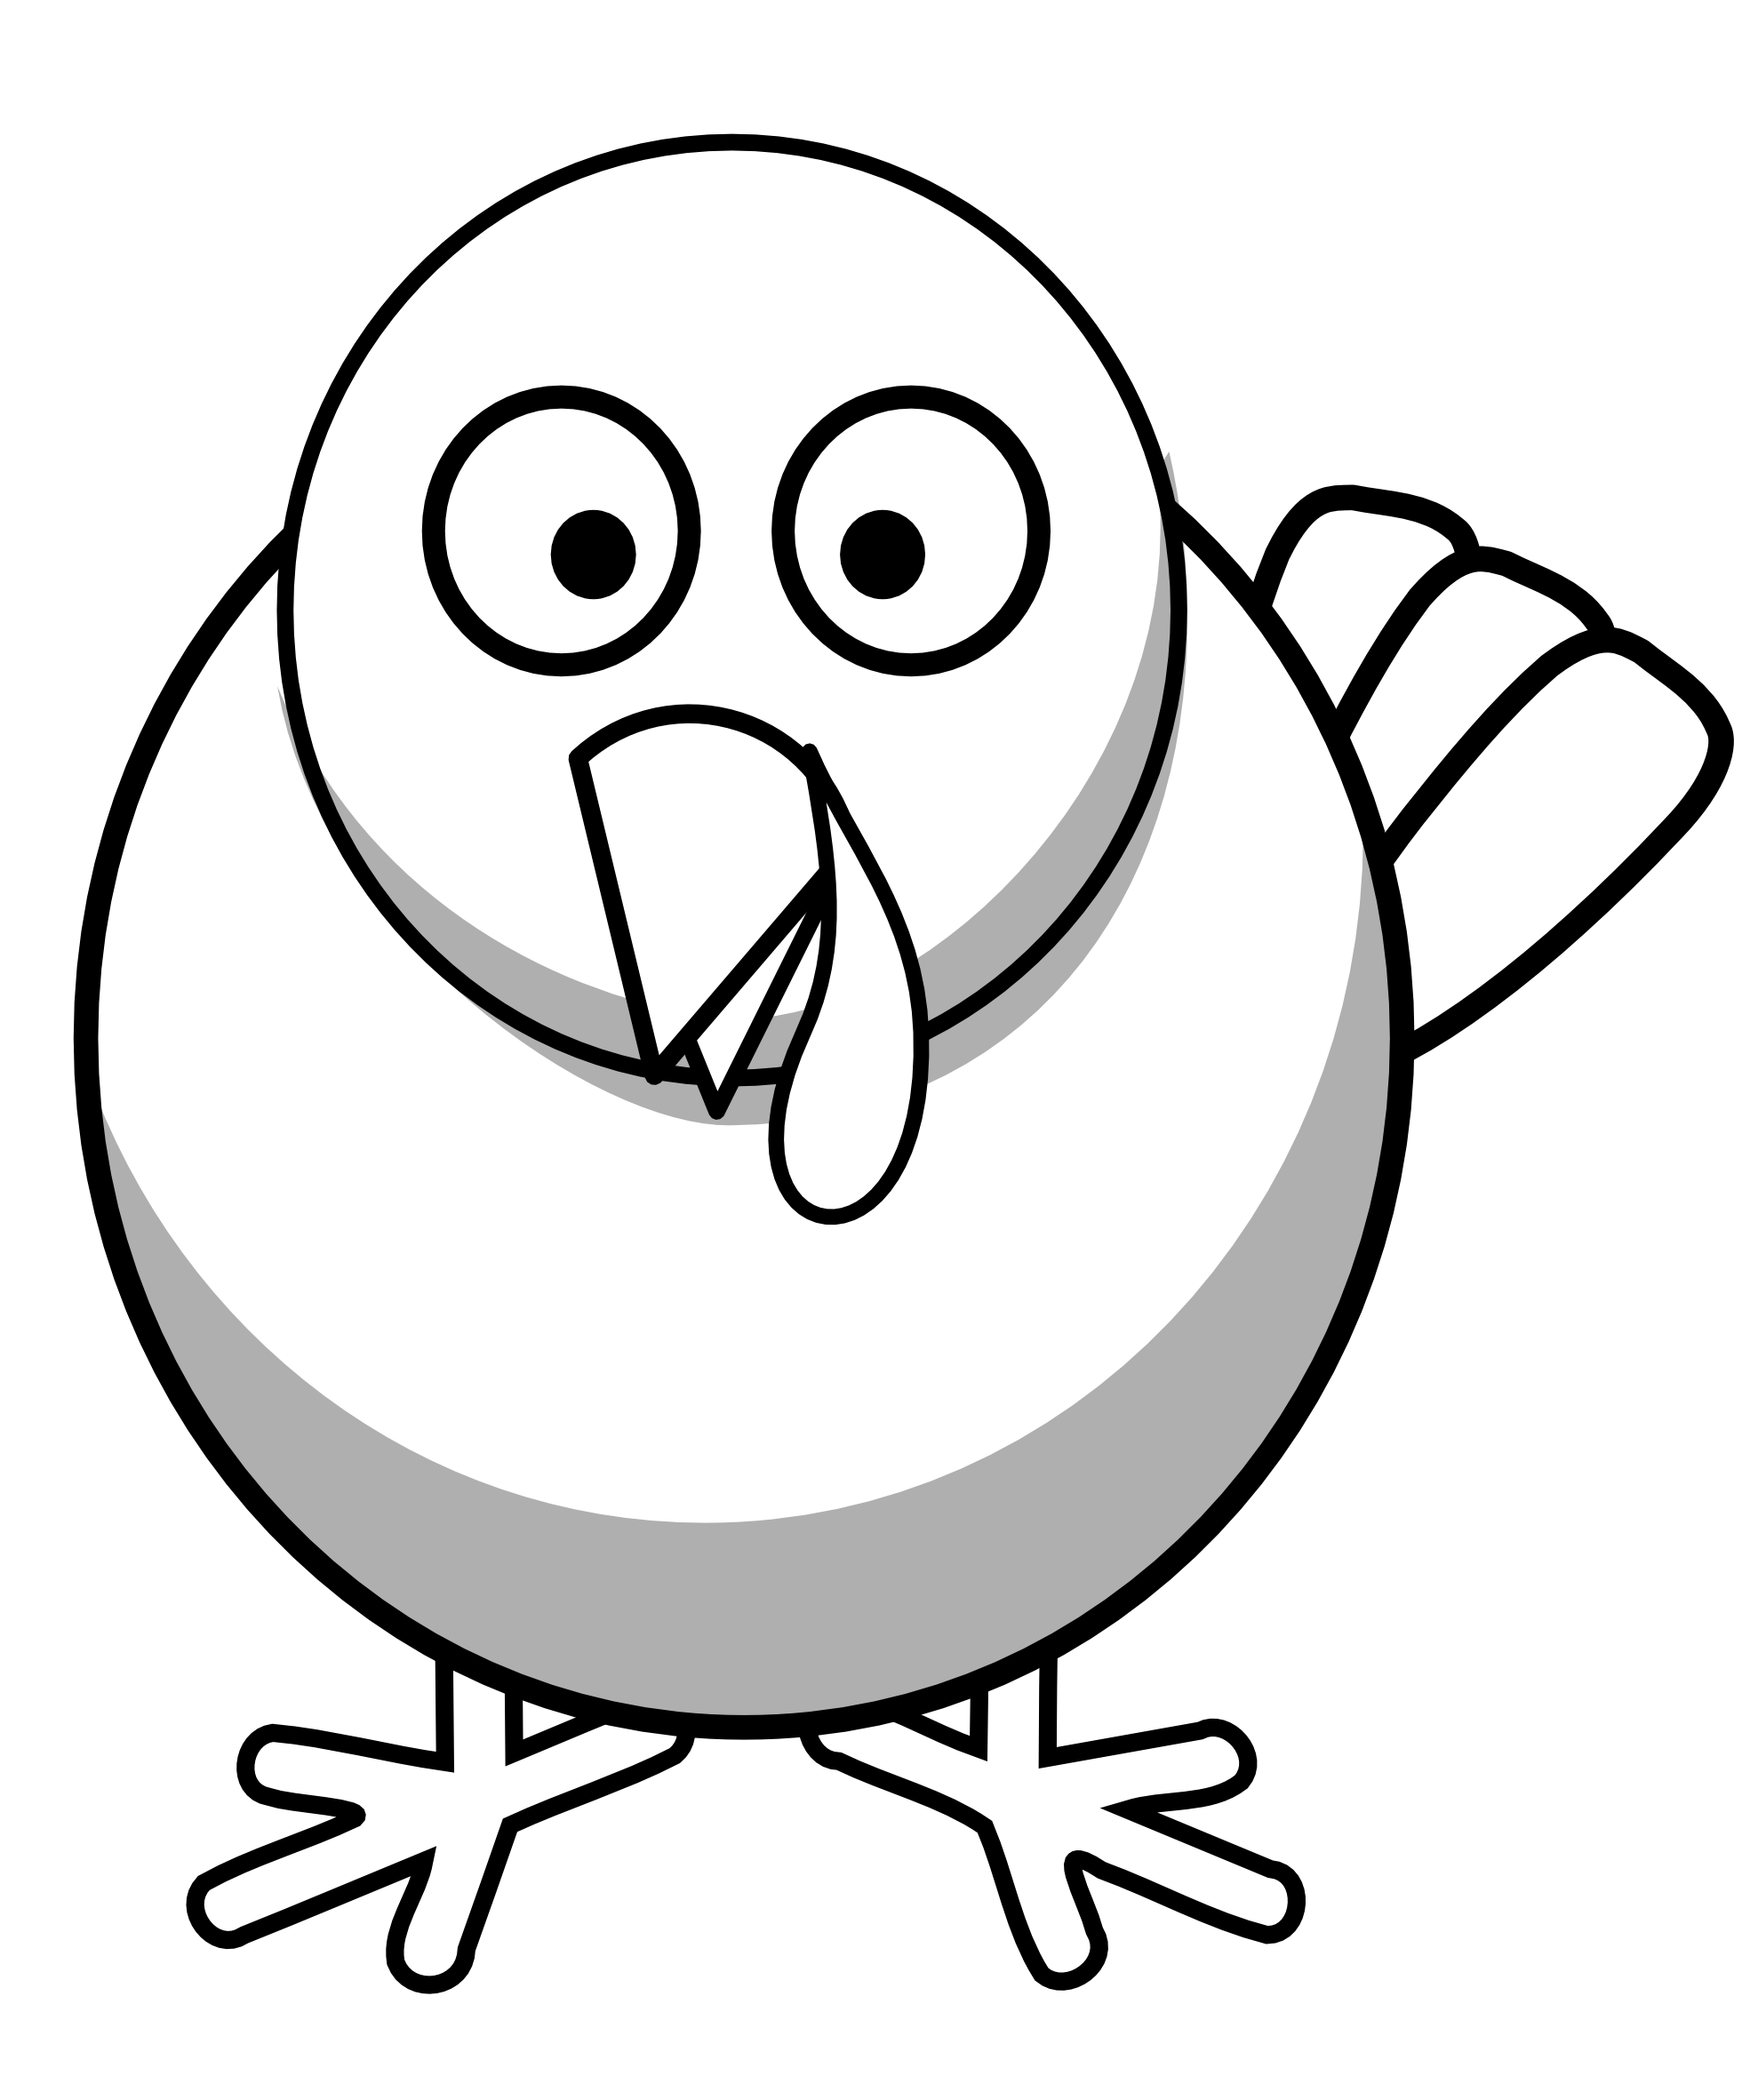 Turkey Feather Clipart Black And White | Clipart Panda - Free ...